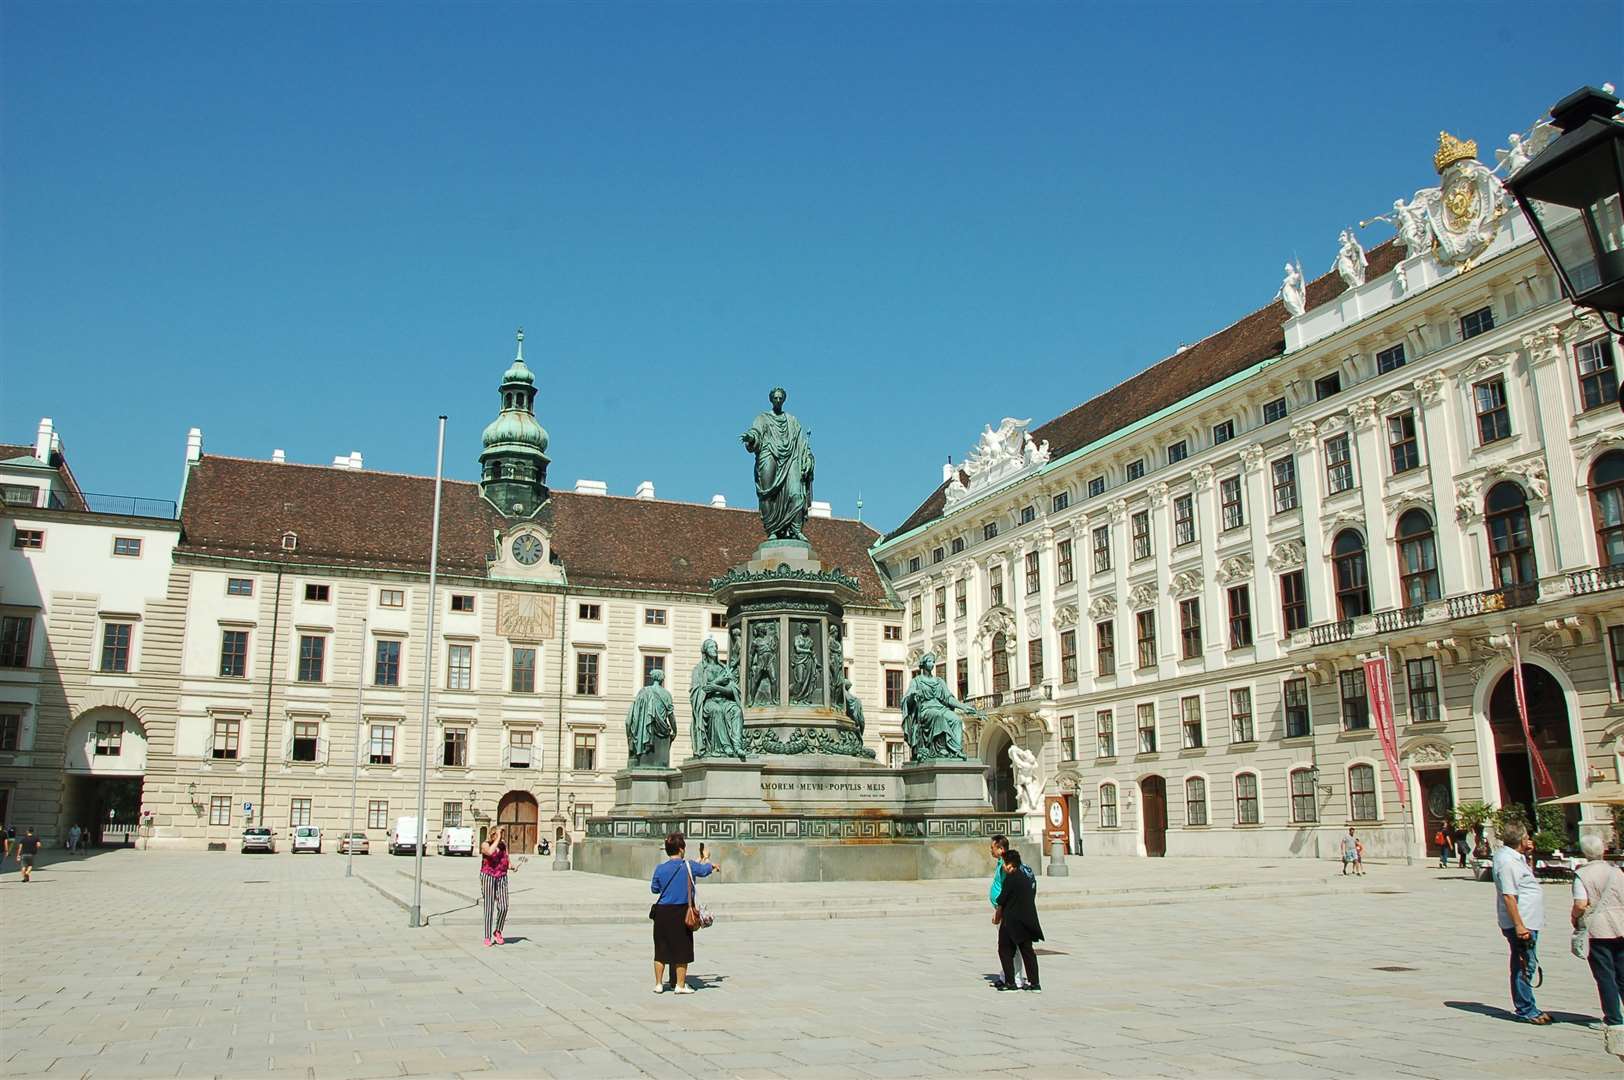 The central courtyard of the massive Hofberg palace.